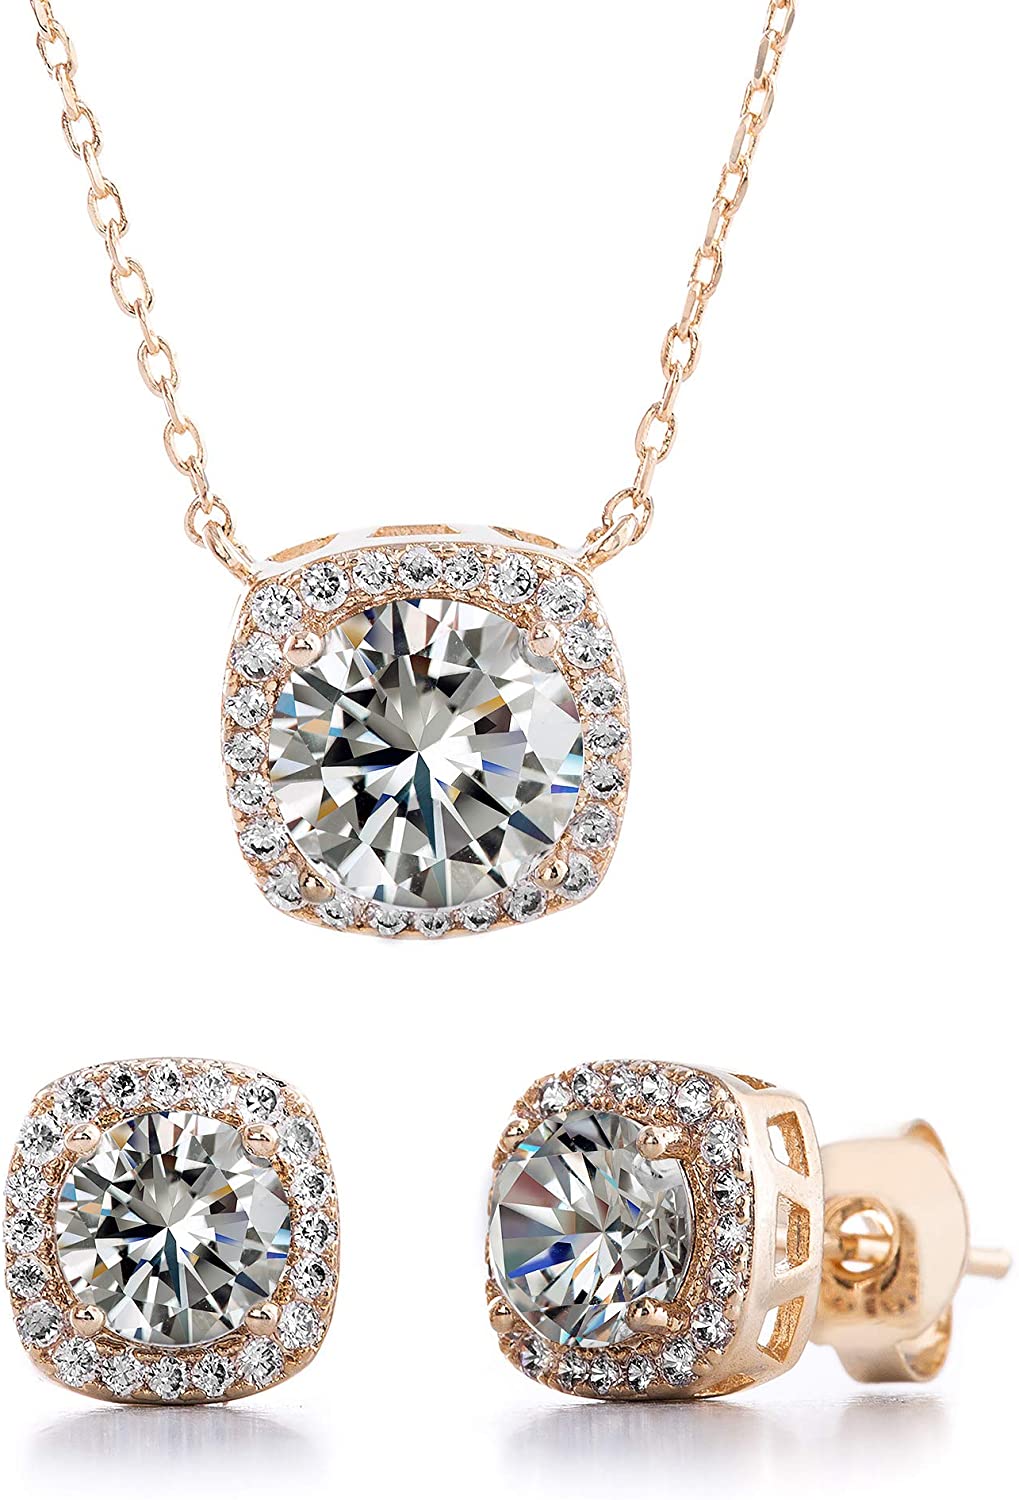 Devine Rose NY Halo Jewelry Set - Duo Crystal Halo Stud Earrings and Chain Necklace - Home Decor Gifts and More